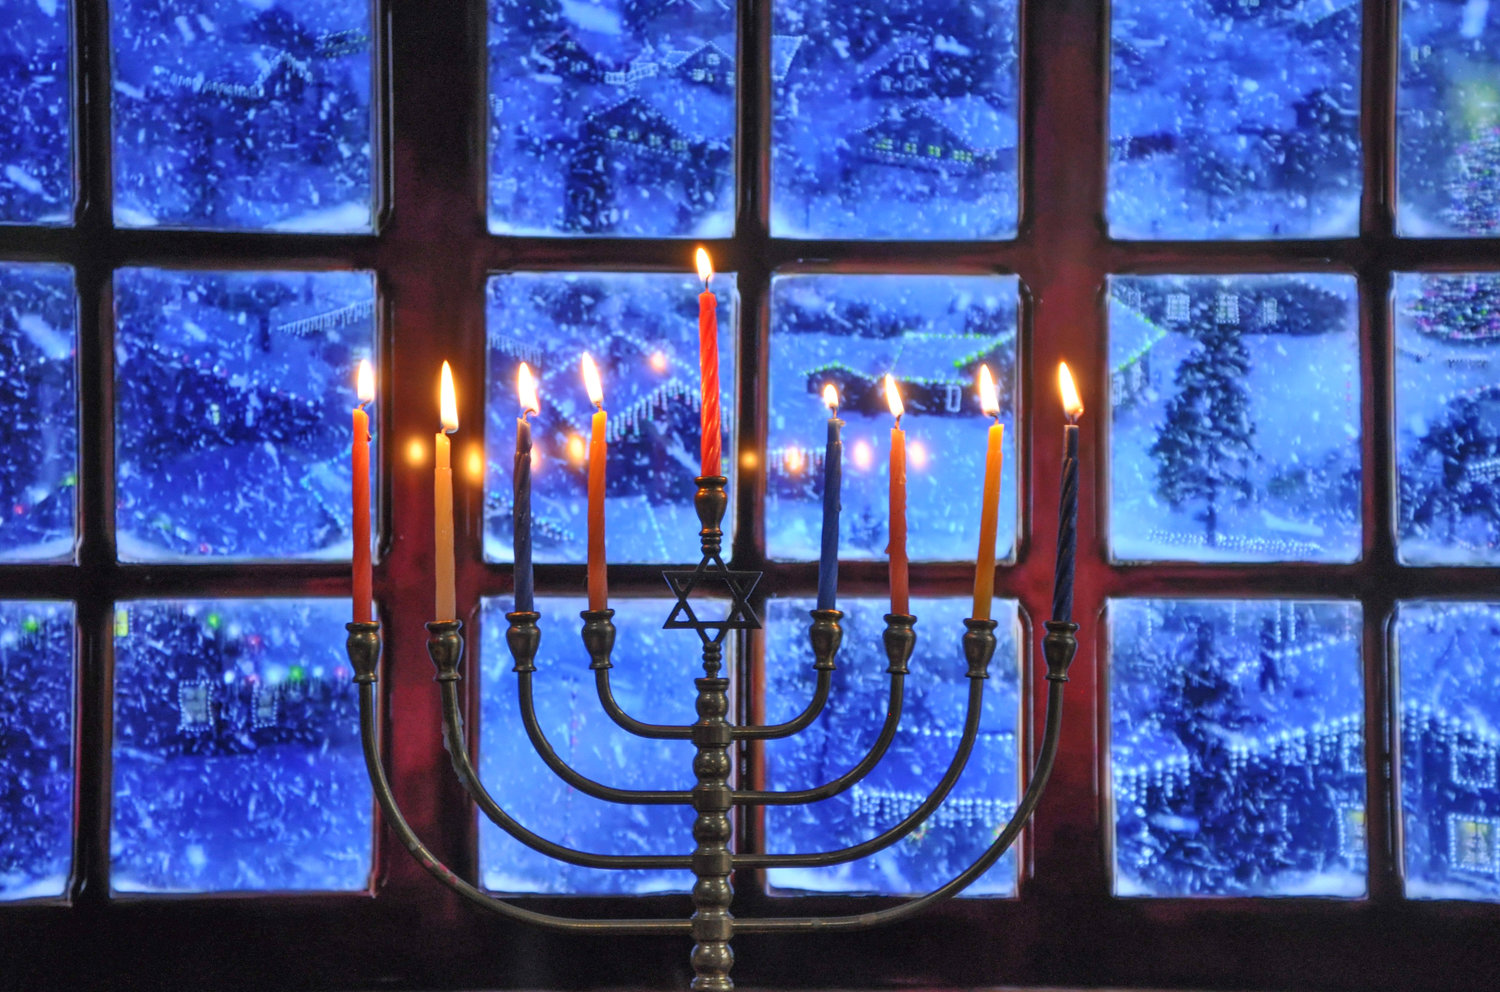 My Gramma's brass menorah is real, but I faked the festive background on my TV.